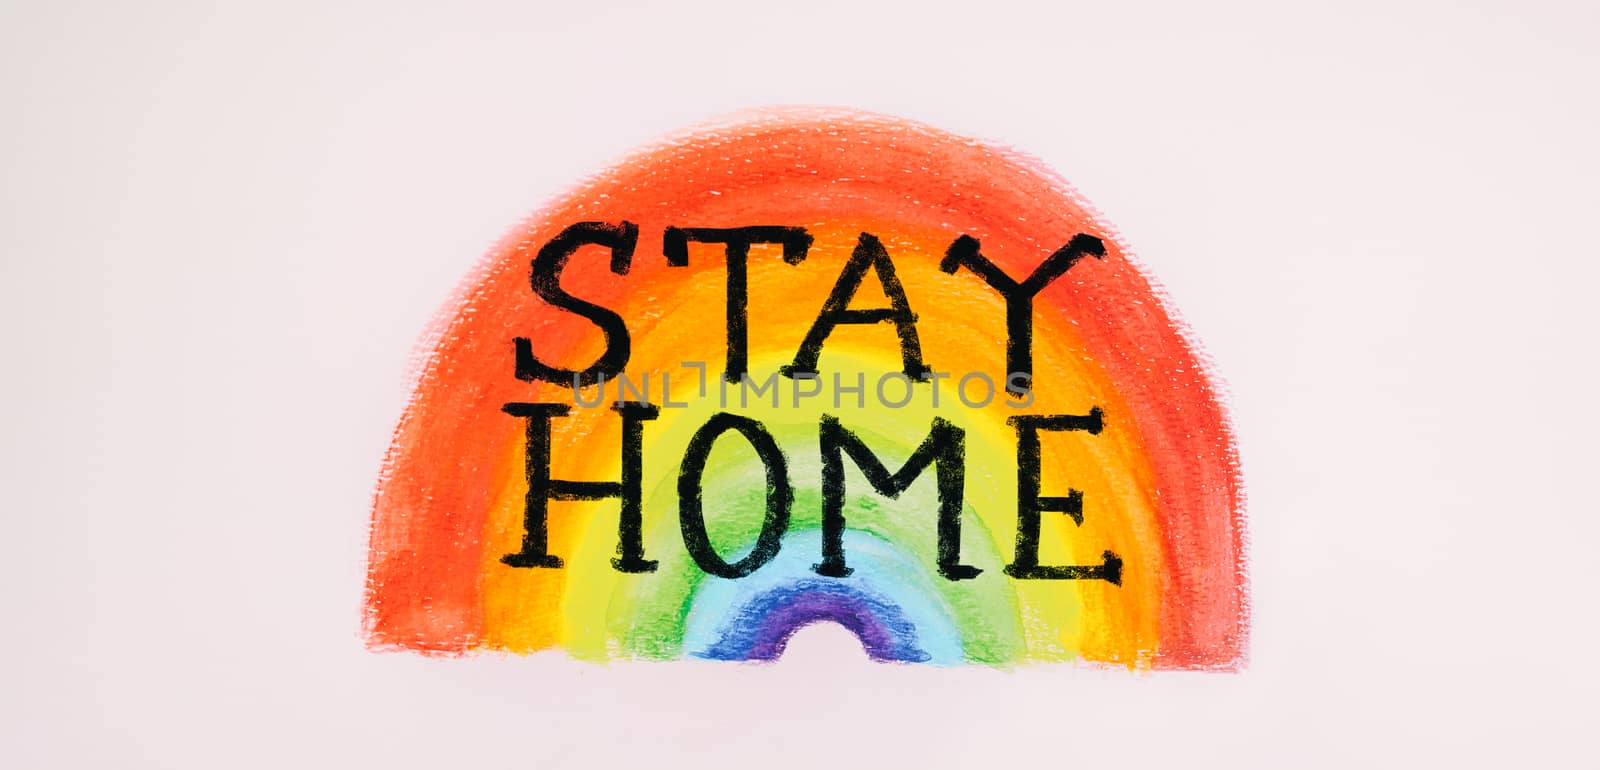 COVID-19 banner Coronavirus staying at home message sign with text "STAY HOME" written over rainbow child panting viral social media message for social distancing awareness. Flatten the curve.